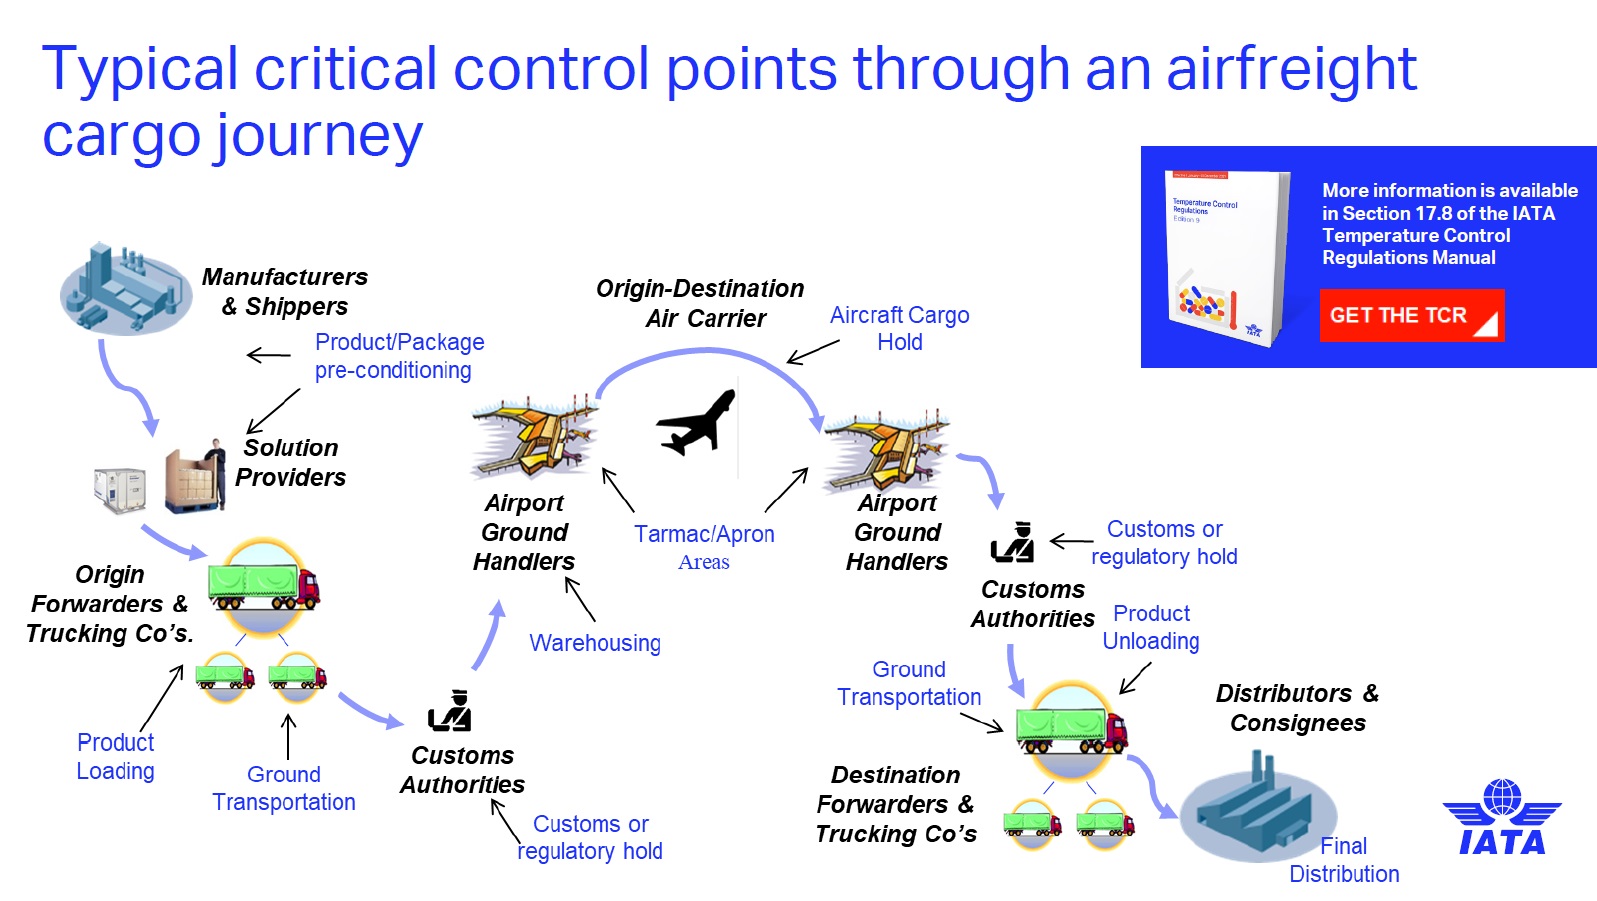 Typical critical control points through an airfreight cargo journey